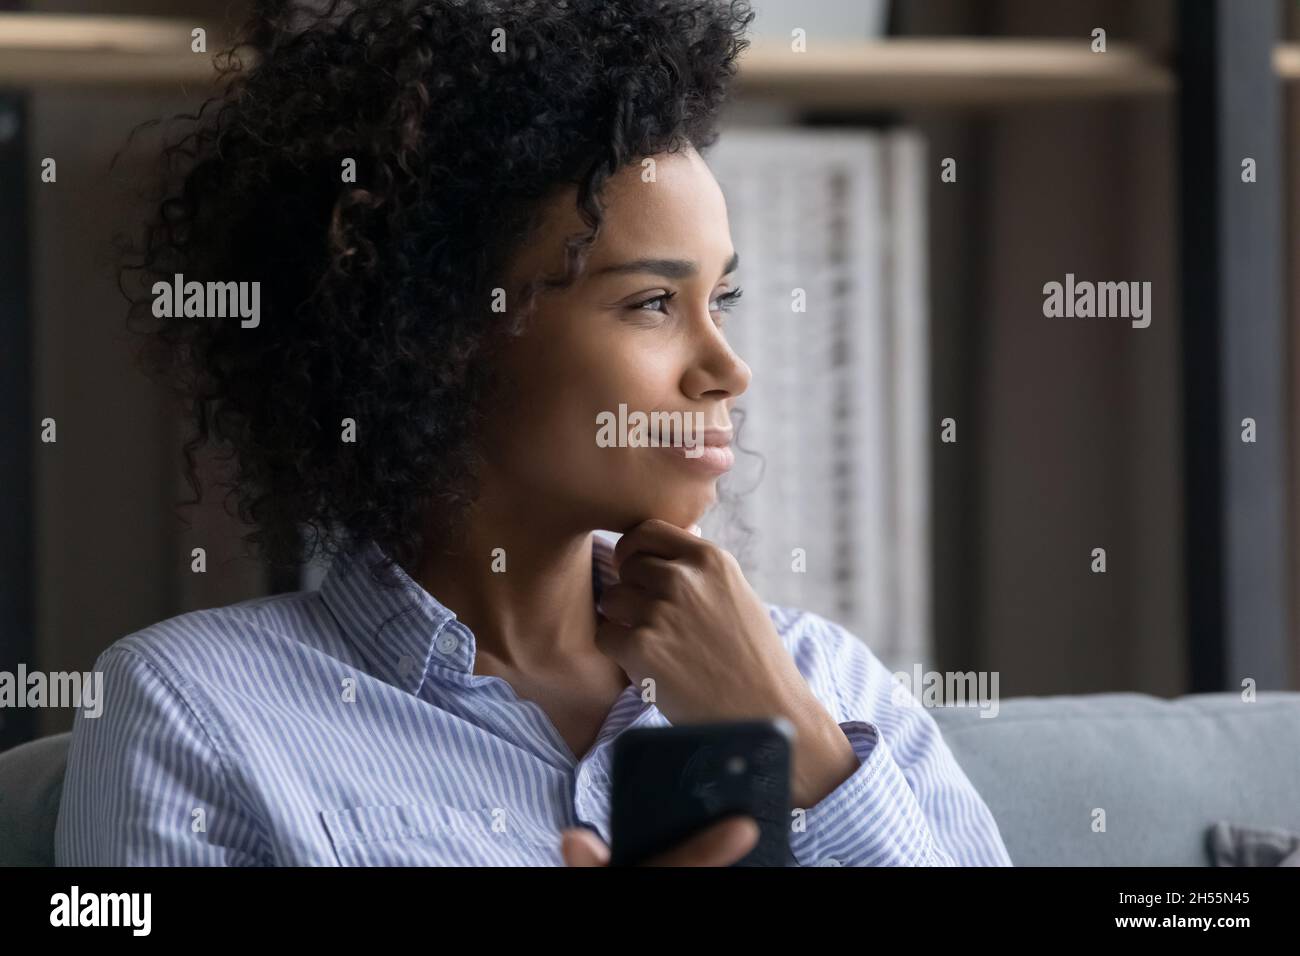 Close up profile smiling dreamy African American woman holding smartphone Stock Photo